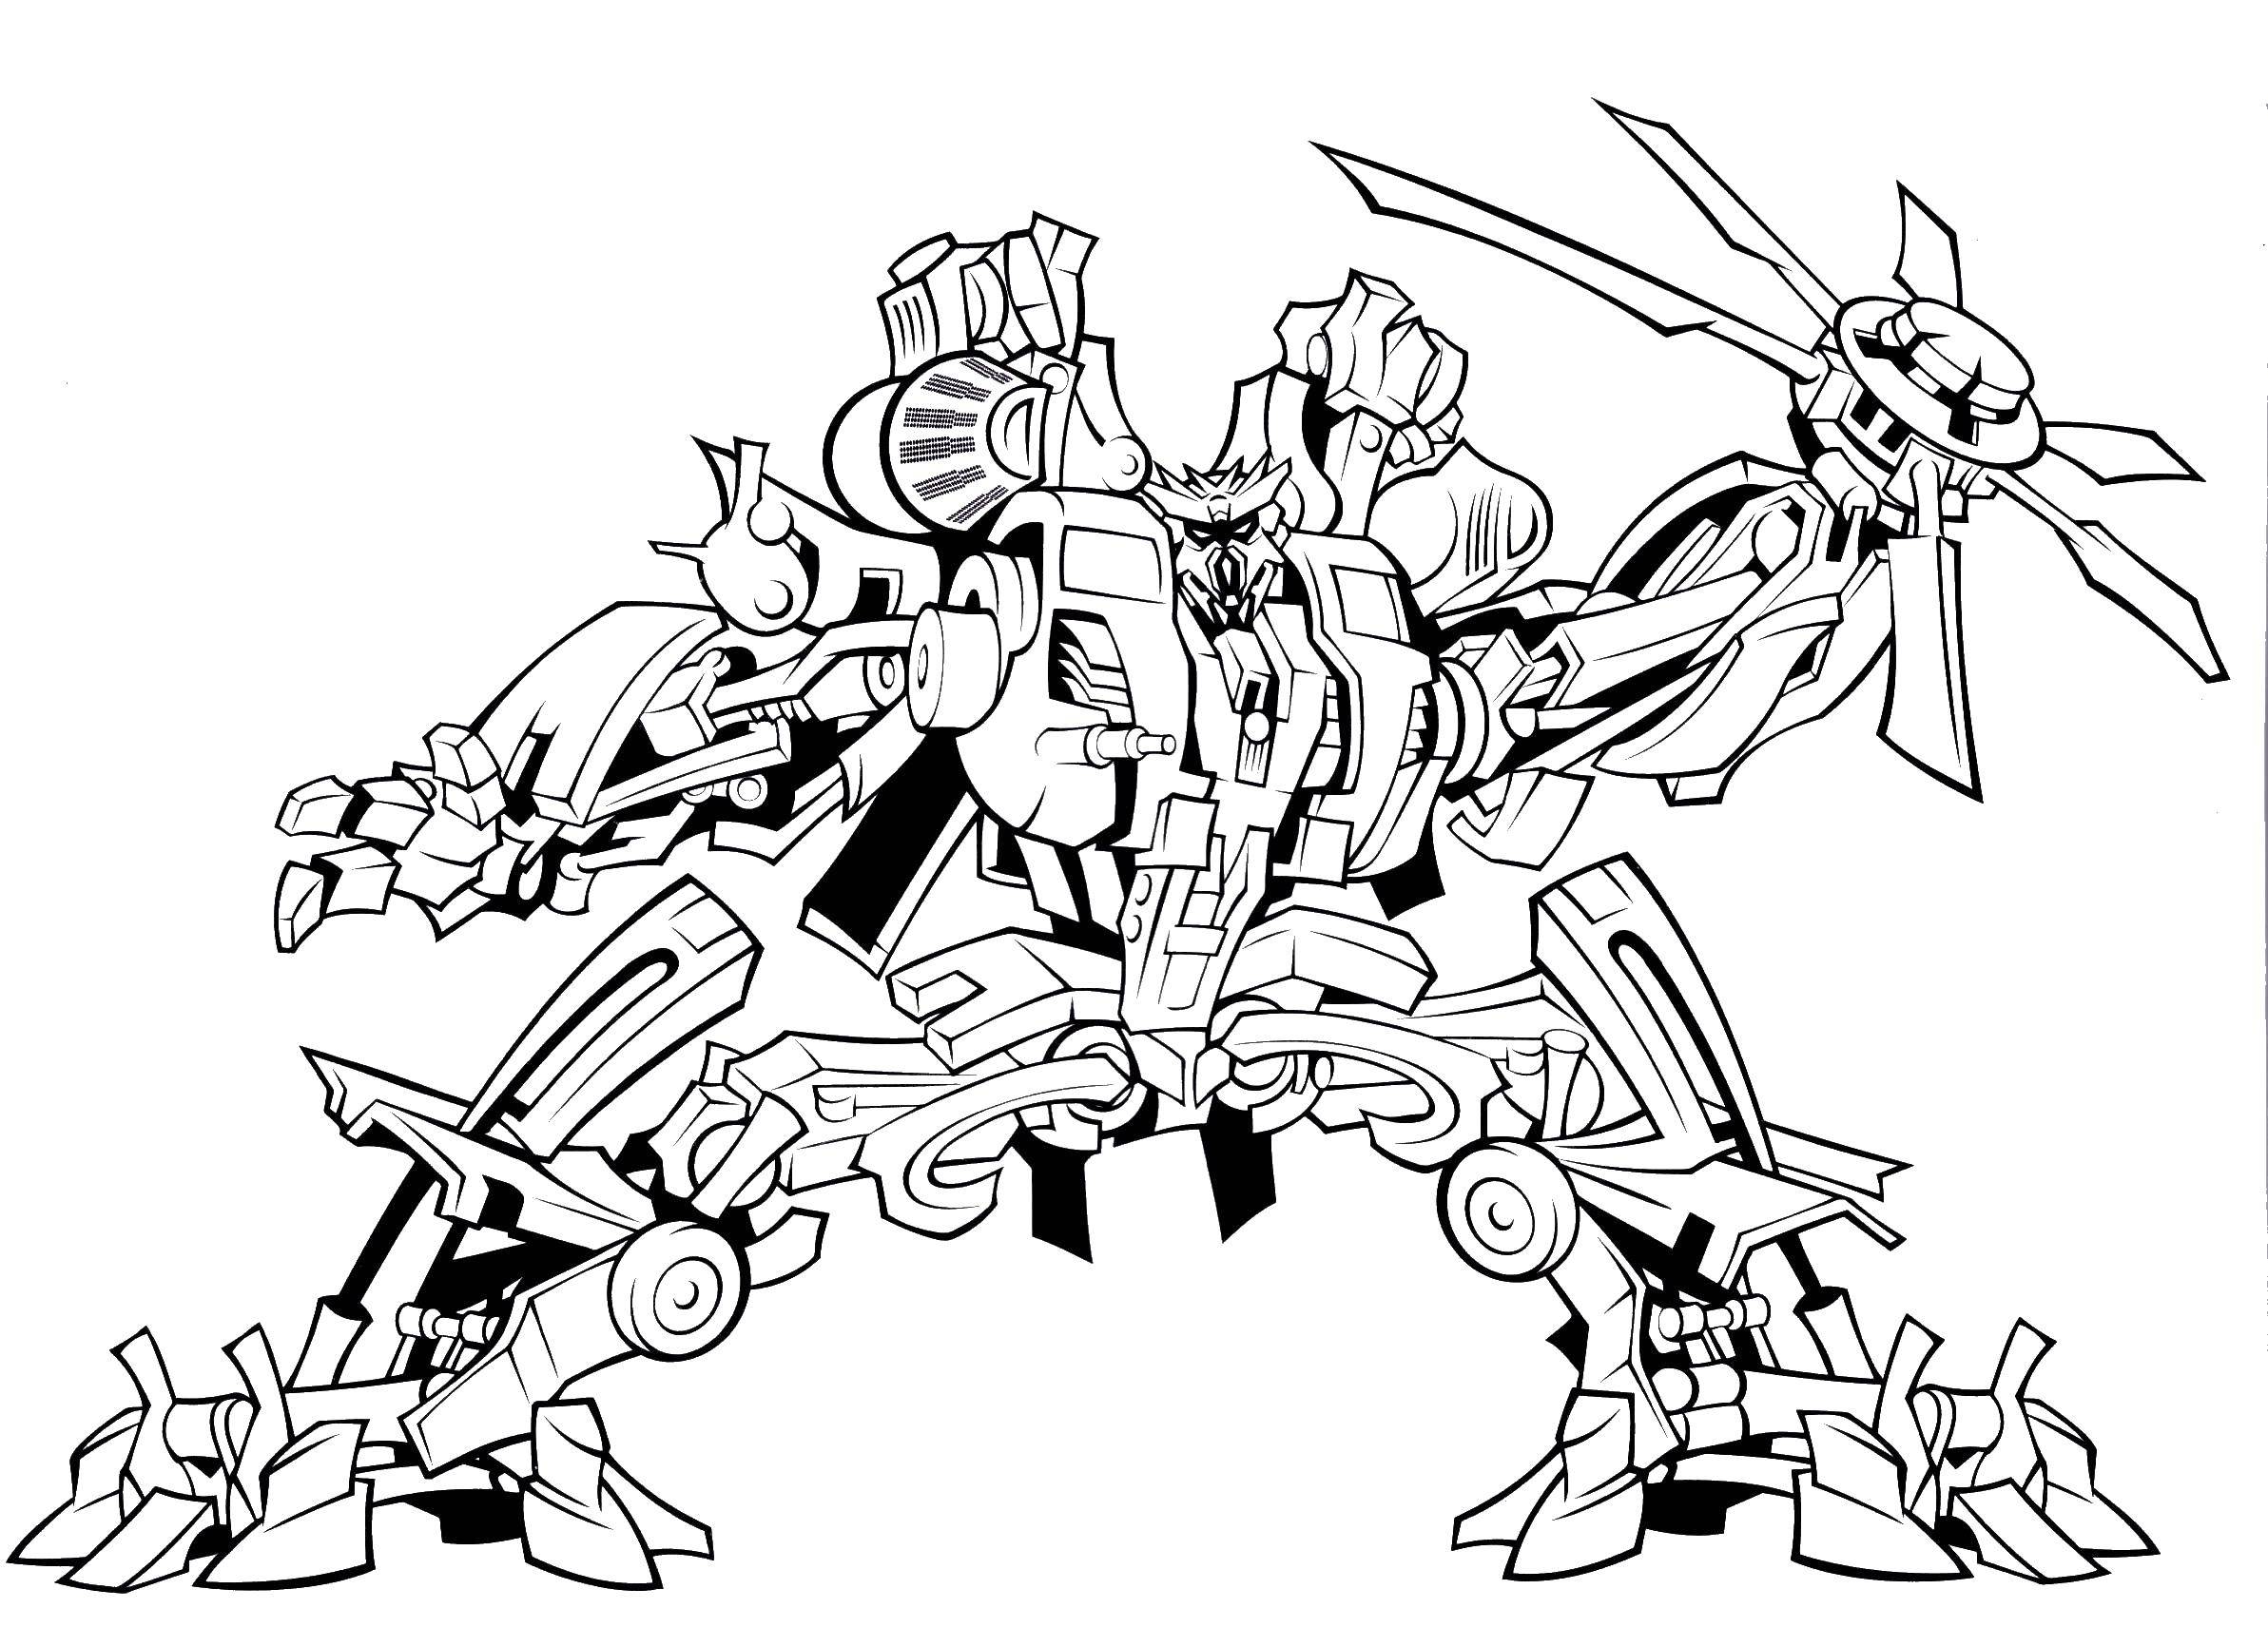 Coloring Transformer. Category transformers. Tags:  Decepticons, transformers.